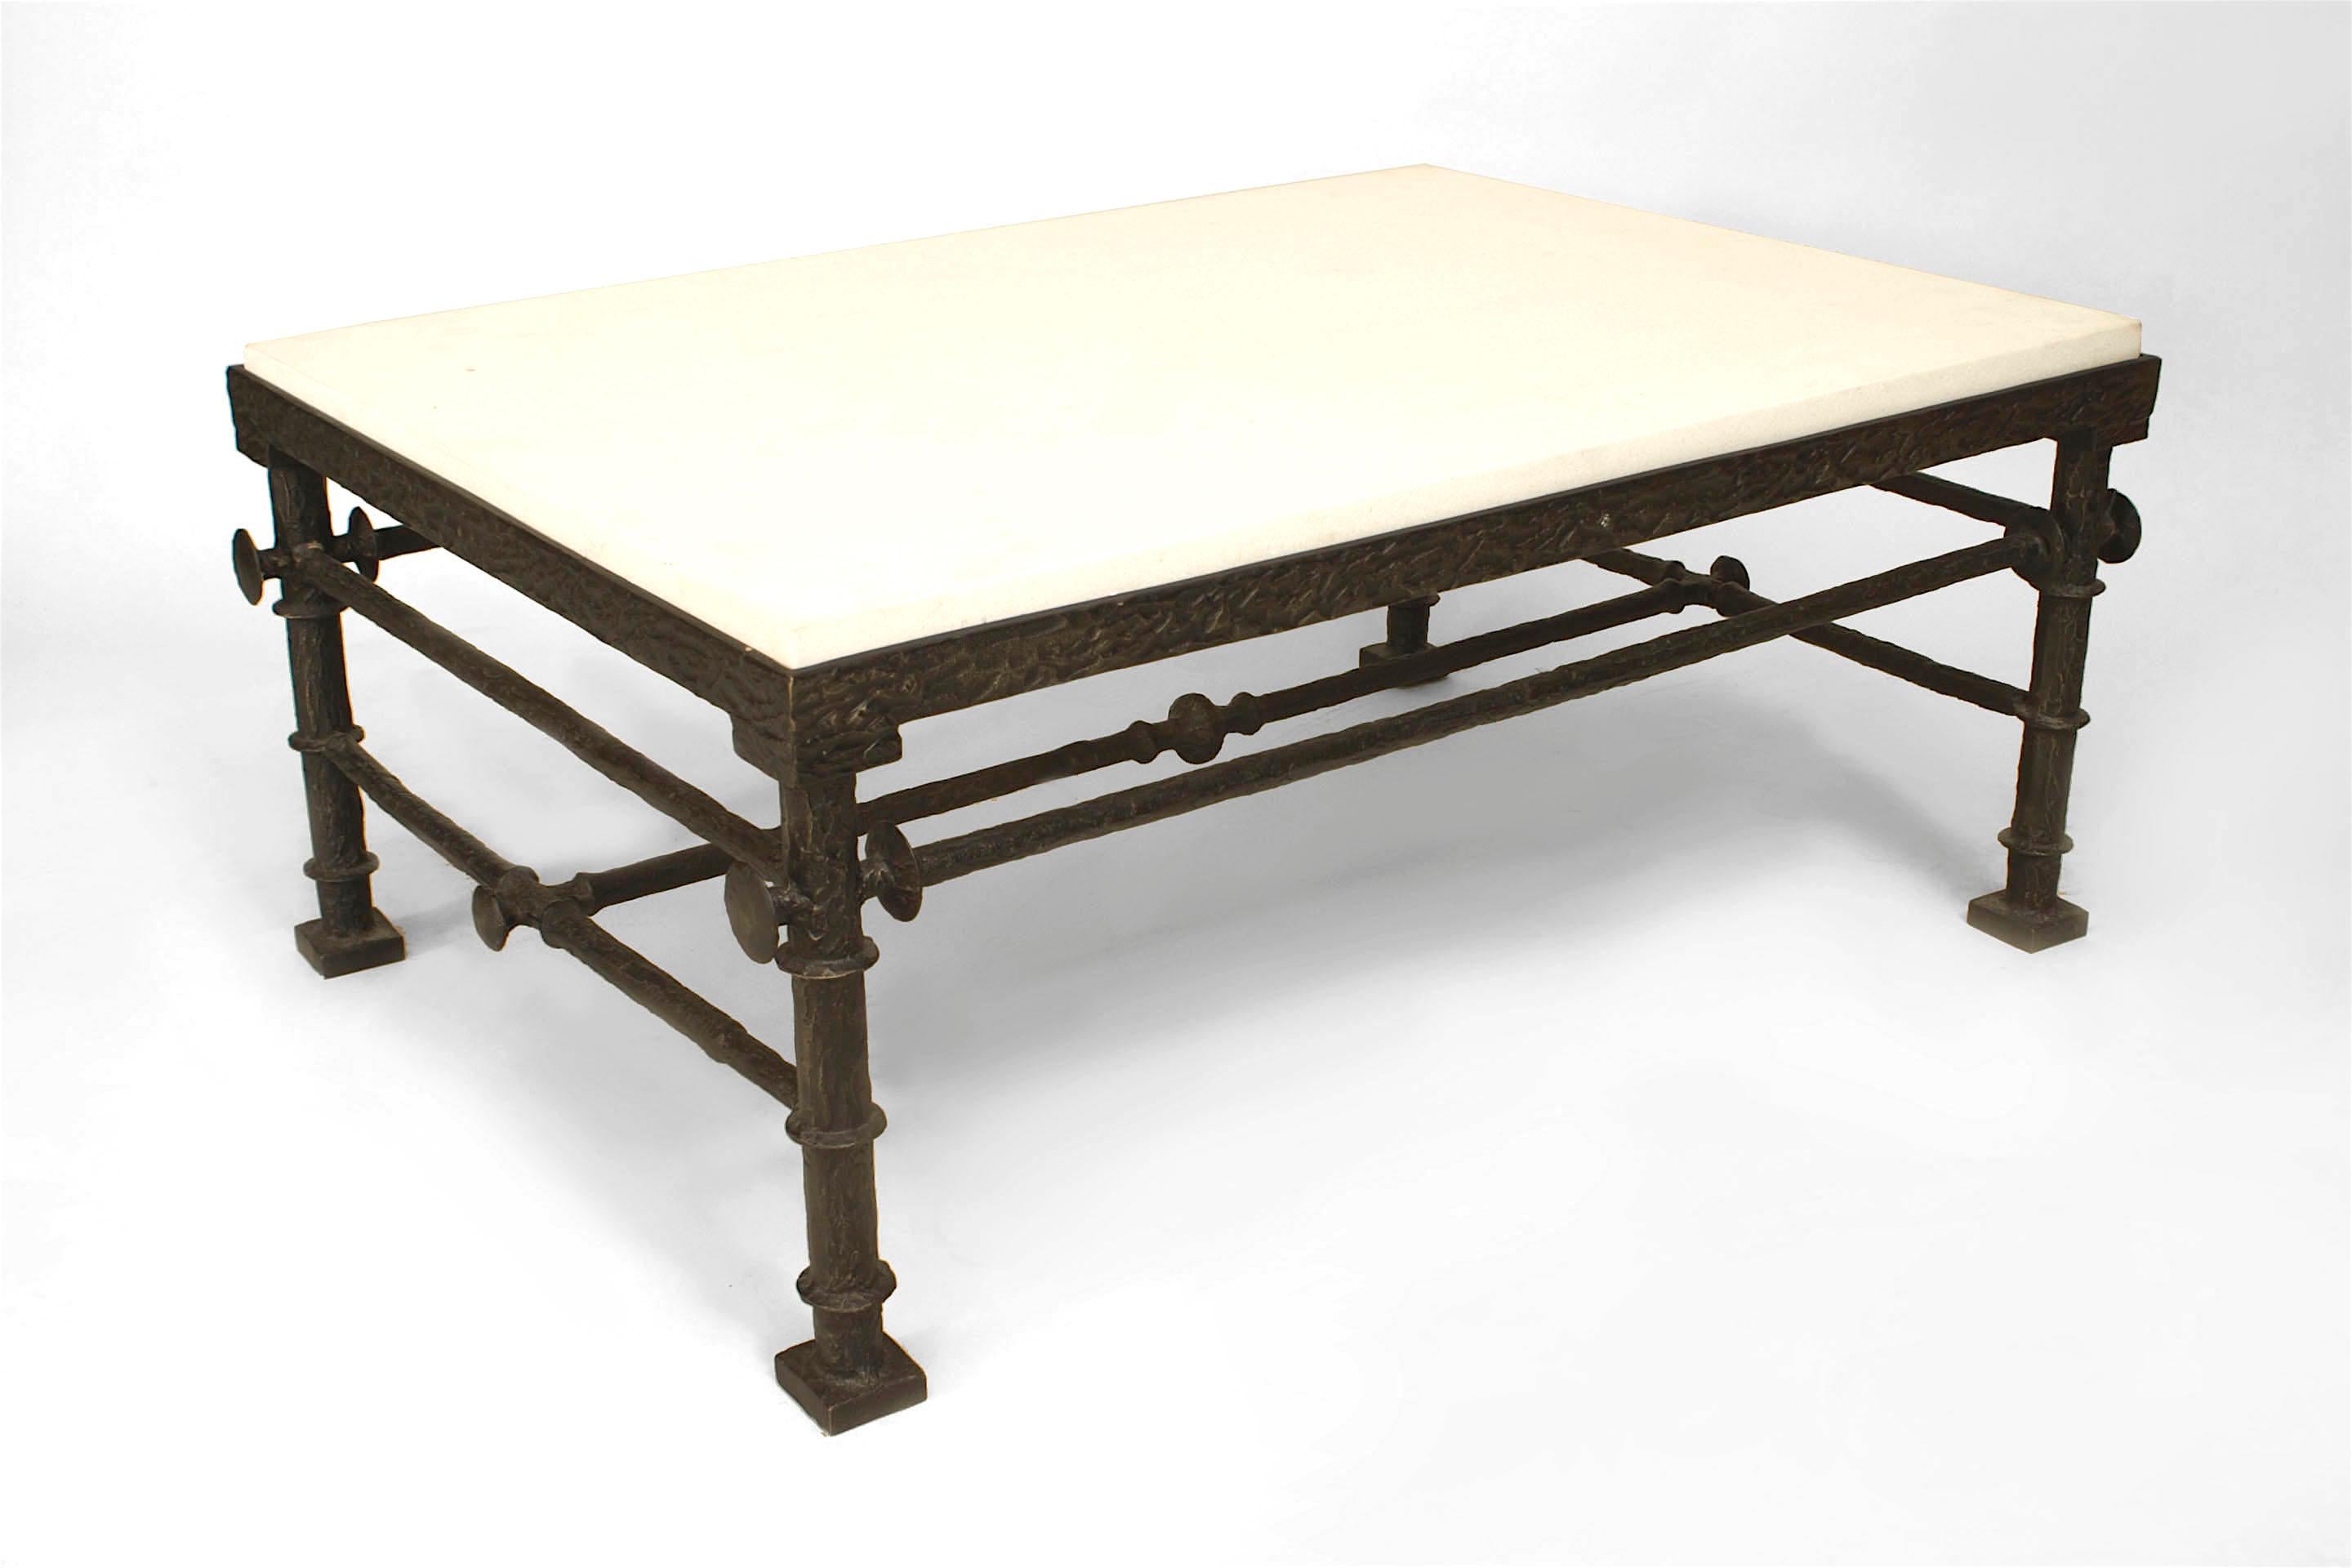 French Modern Grecian-style textured dark patinated bronze coffee table with double stretcher sides and a limestone top. (manner of ALBERTO GIACOMETTI)
